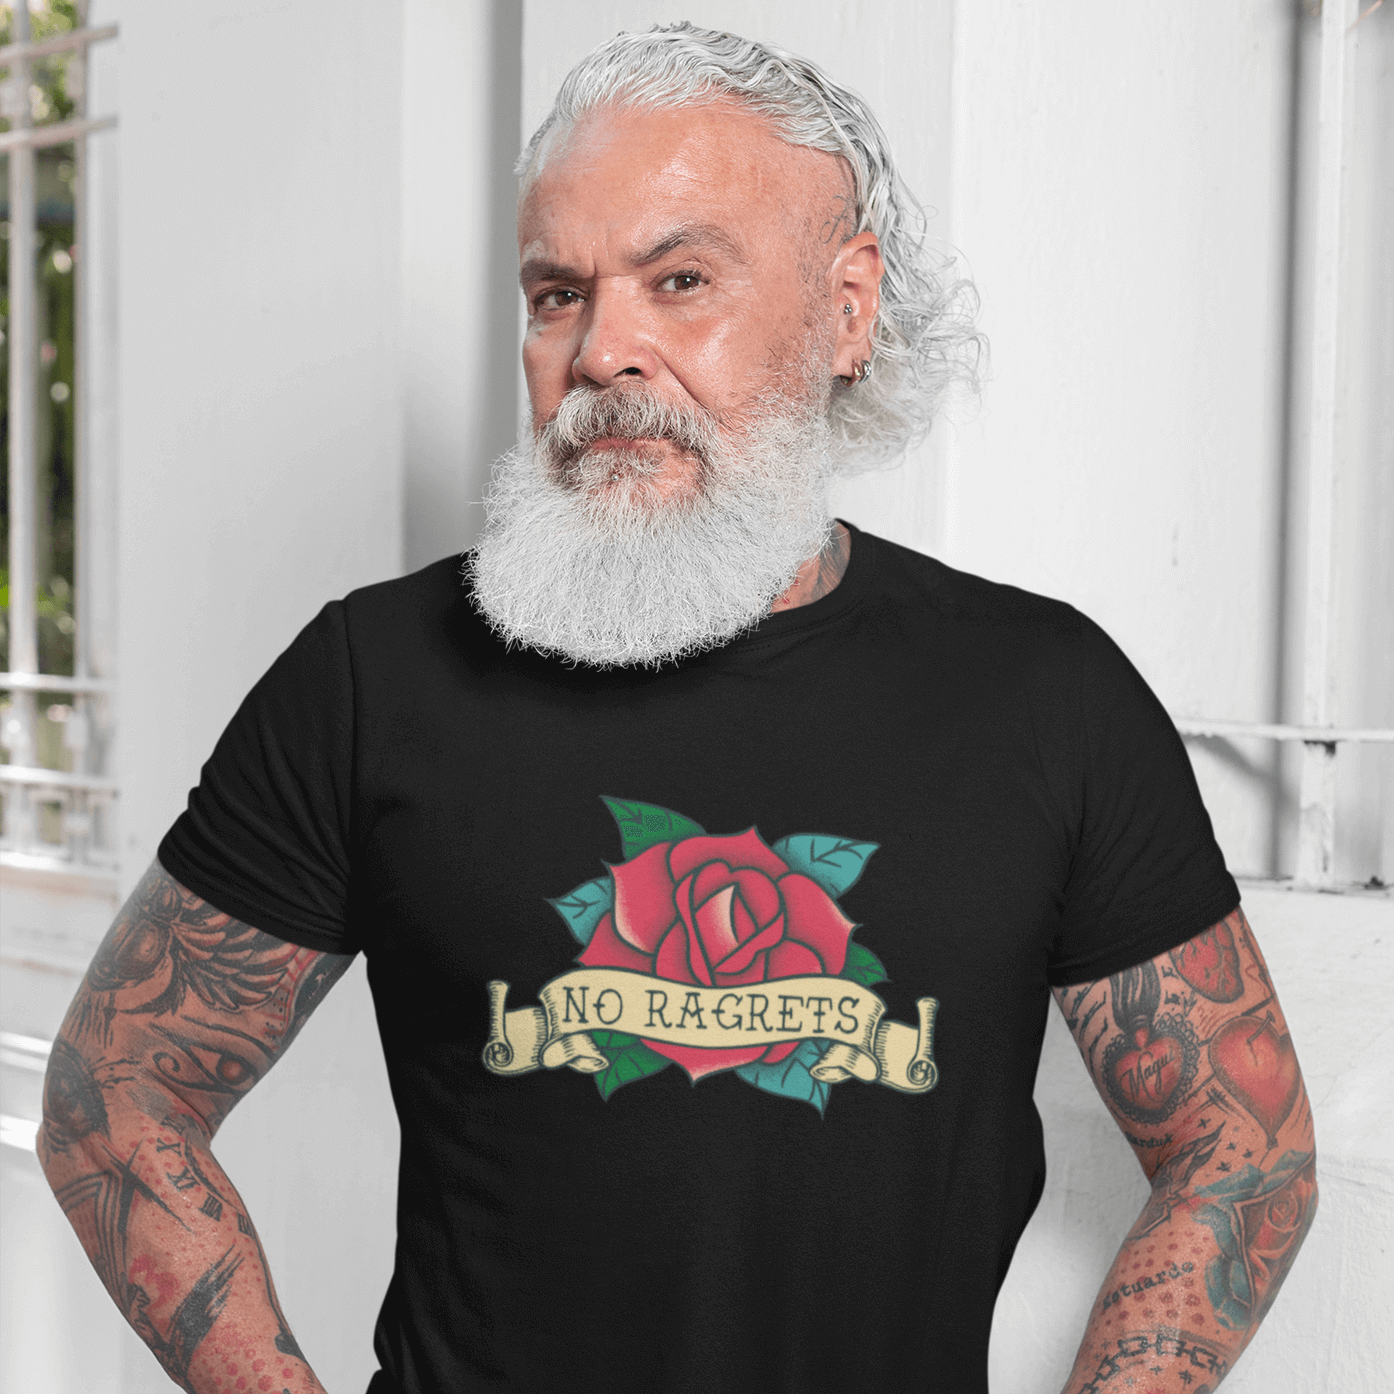 Tattooed bearded man wearing a black t-shirt with a funny image of an old school rose flash tattoo & the words no ragrets. The word regrets is intentionally misspelled.